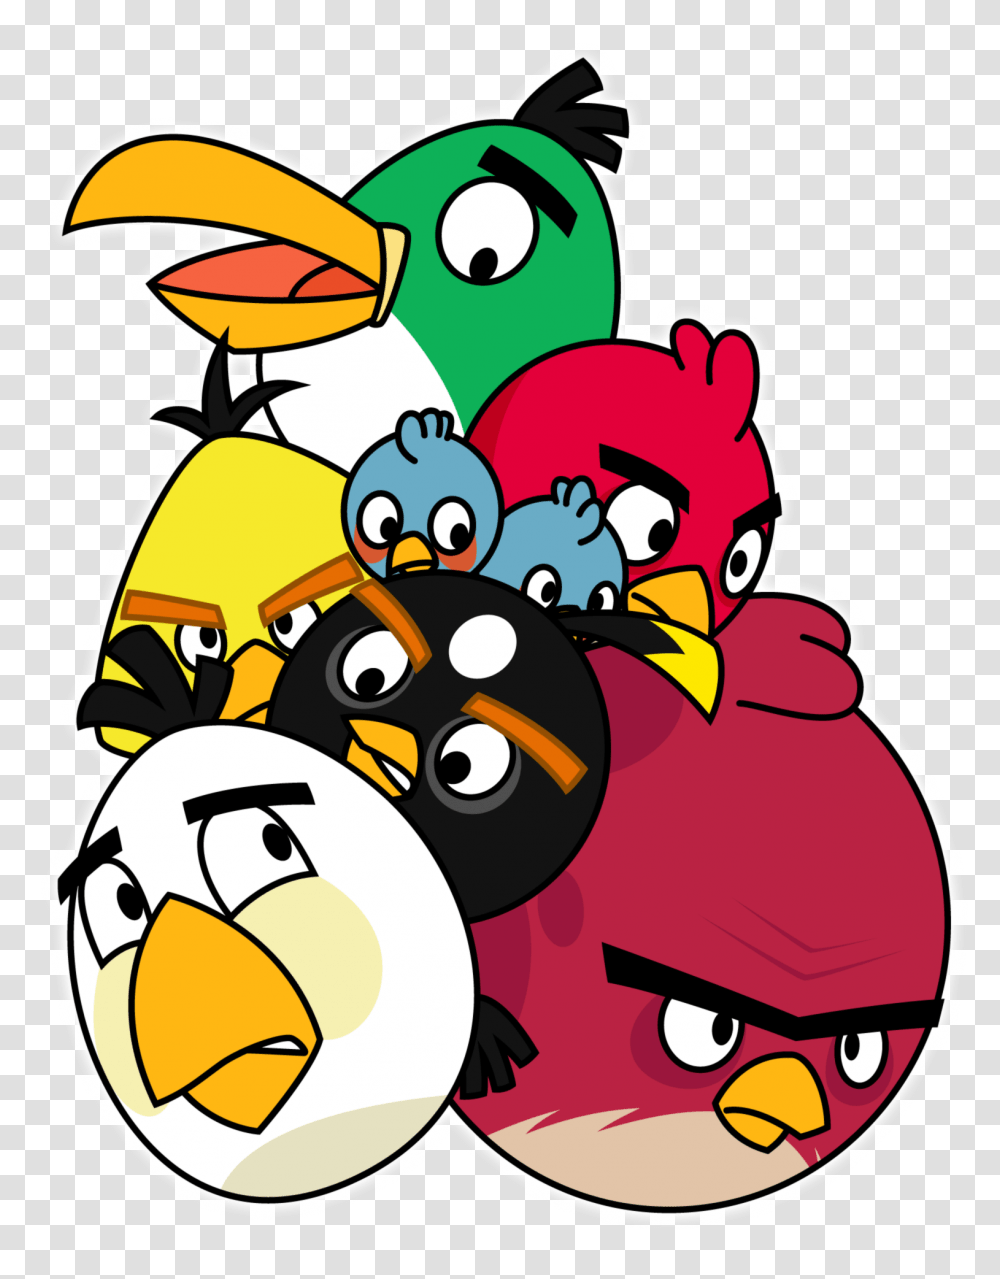 Angry Birds Angry Birds Images Transparent Png